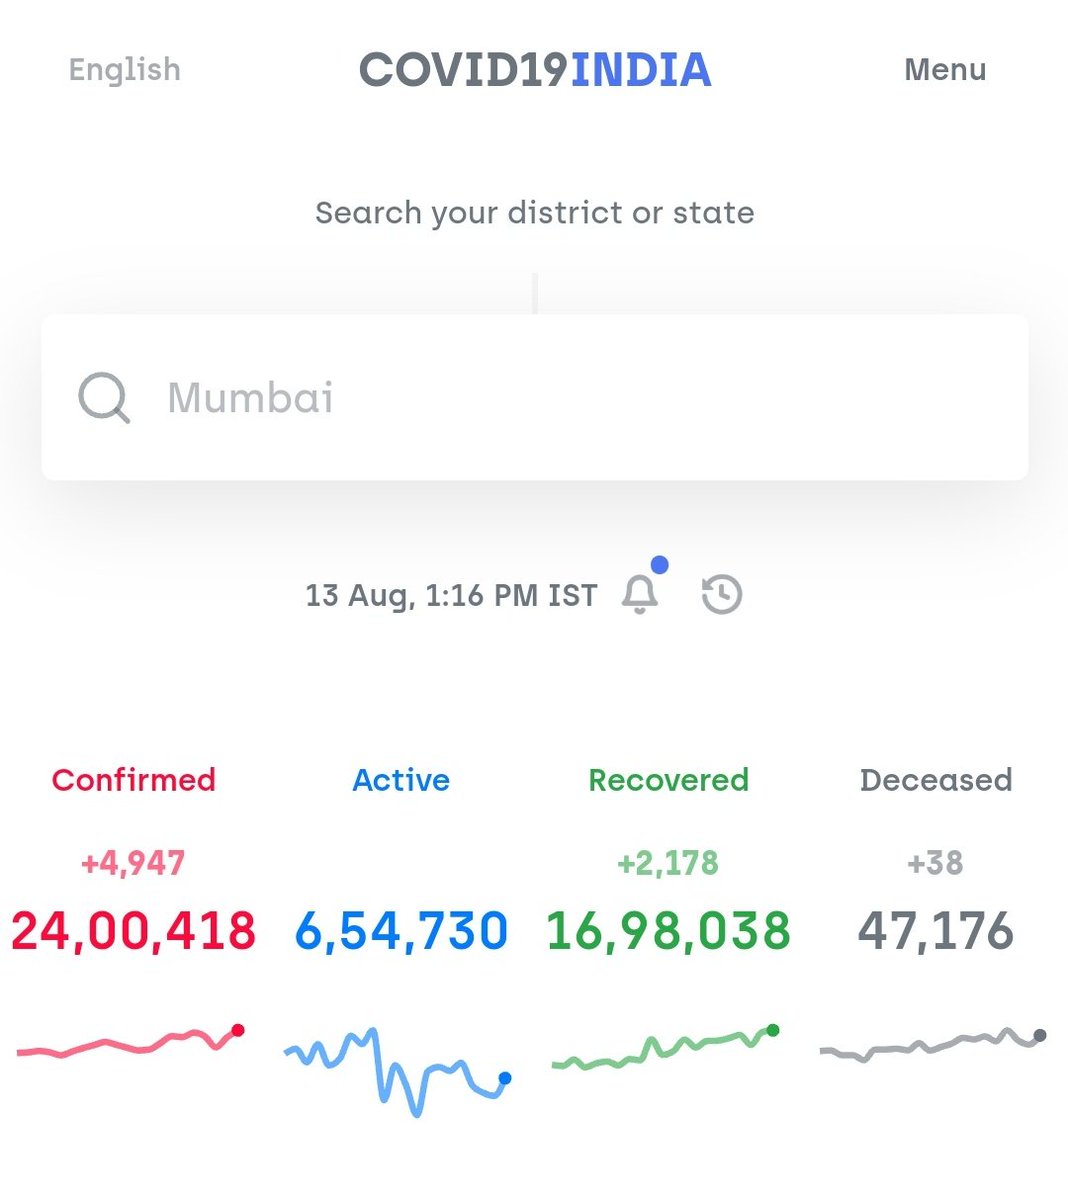 Crossed 24 lakhs of confirmed cases. 6.5L active cases. #COVID19India